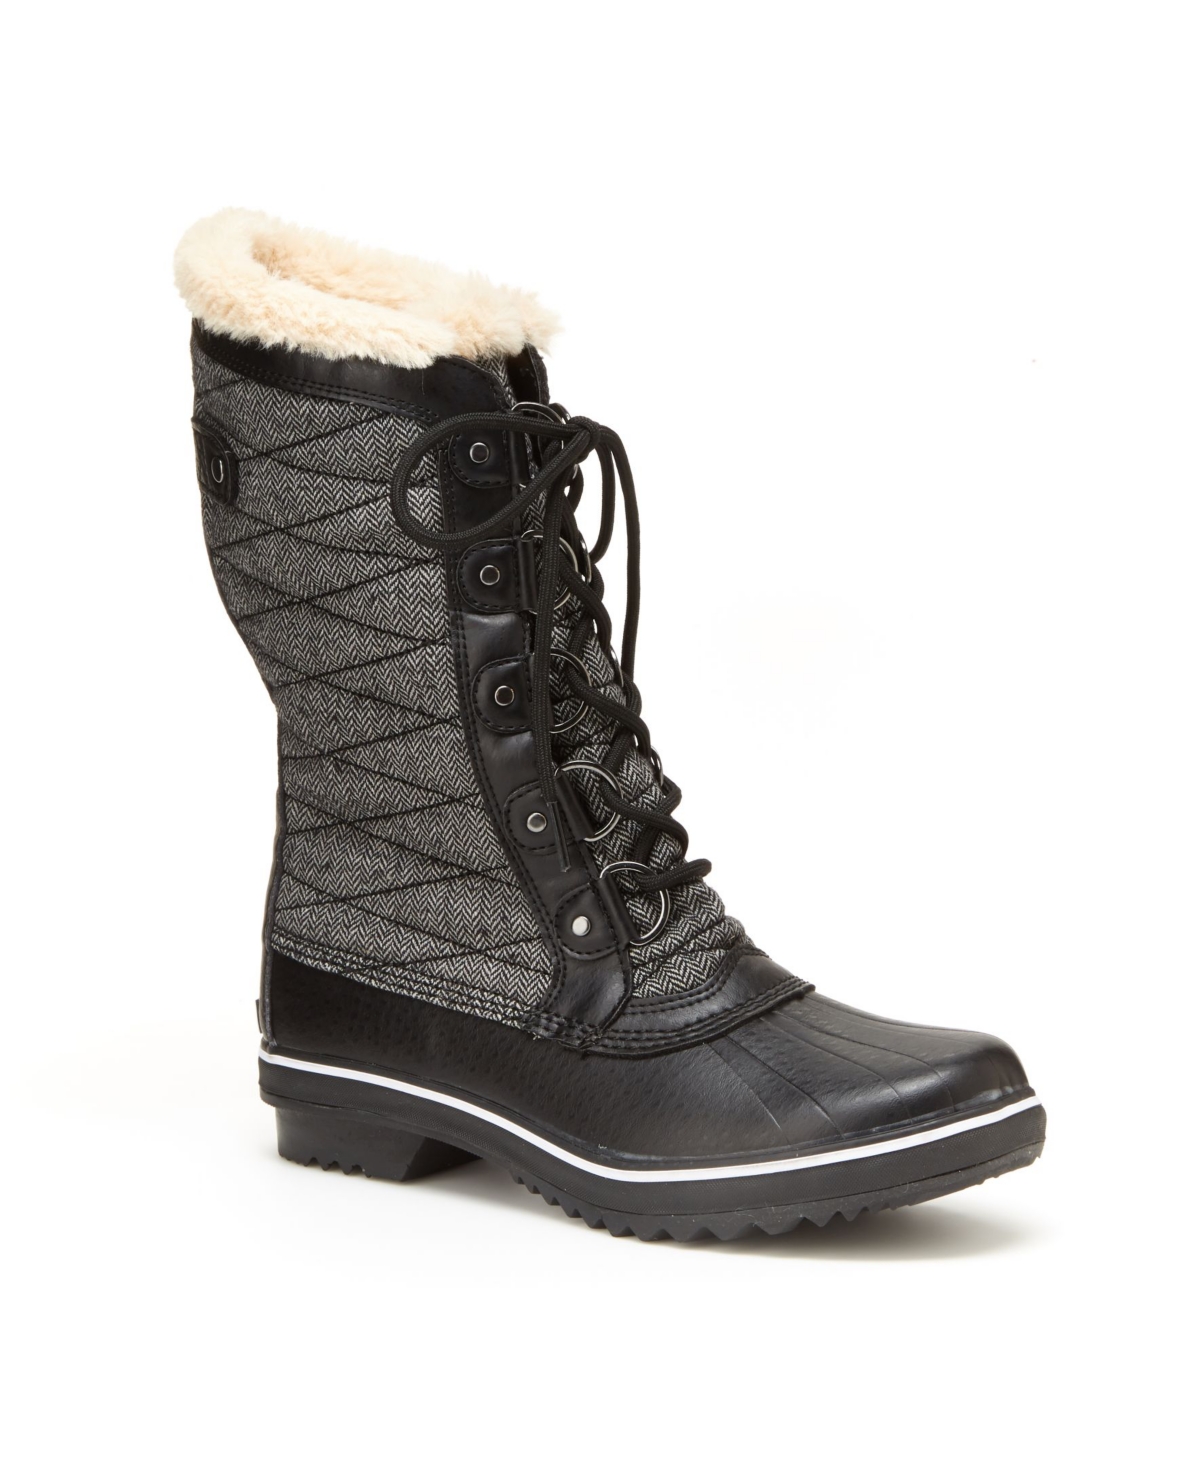 Jbu Chilly Women's Mid Calf Boots Women's Shoes